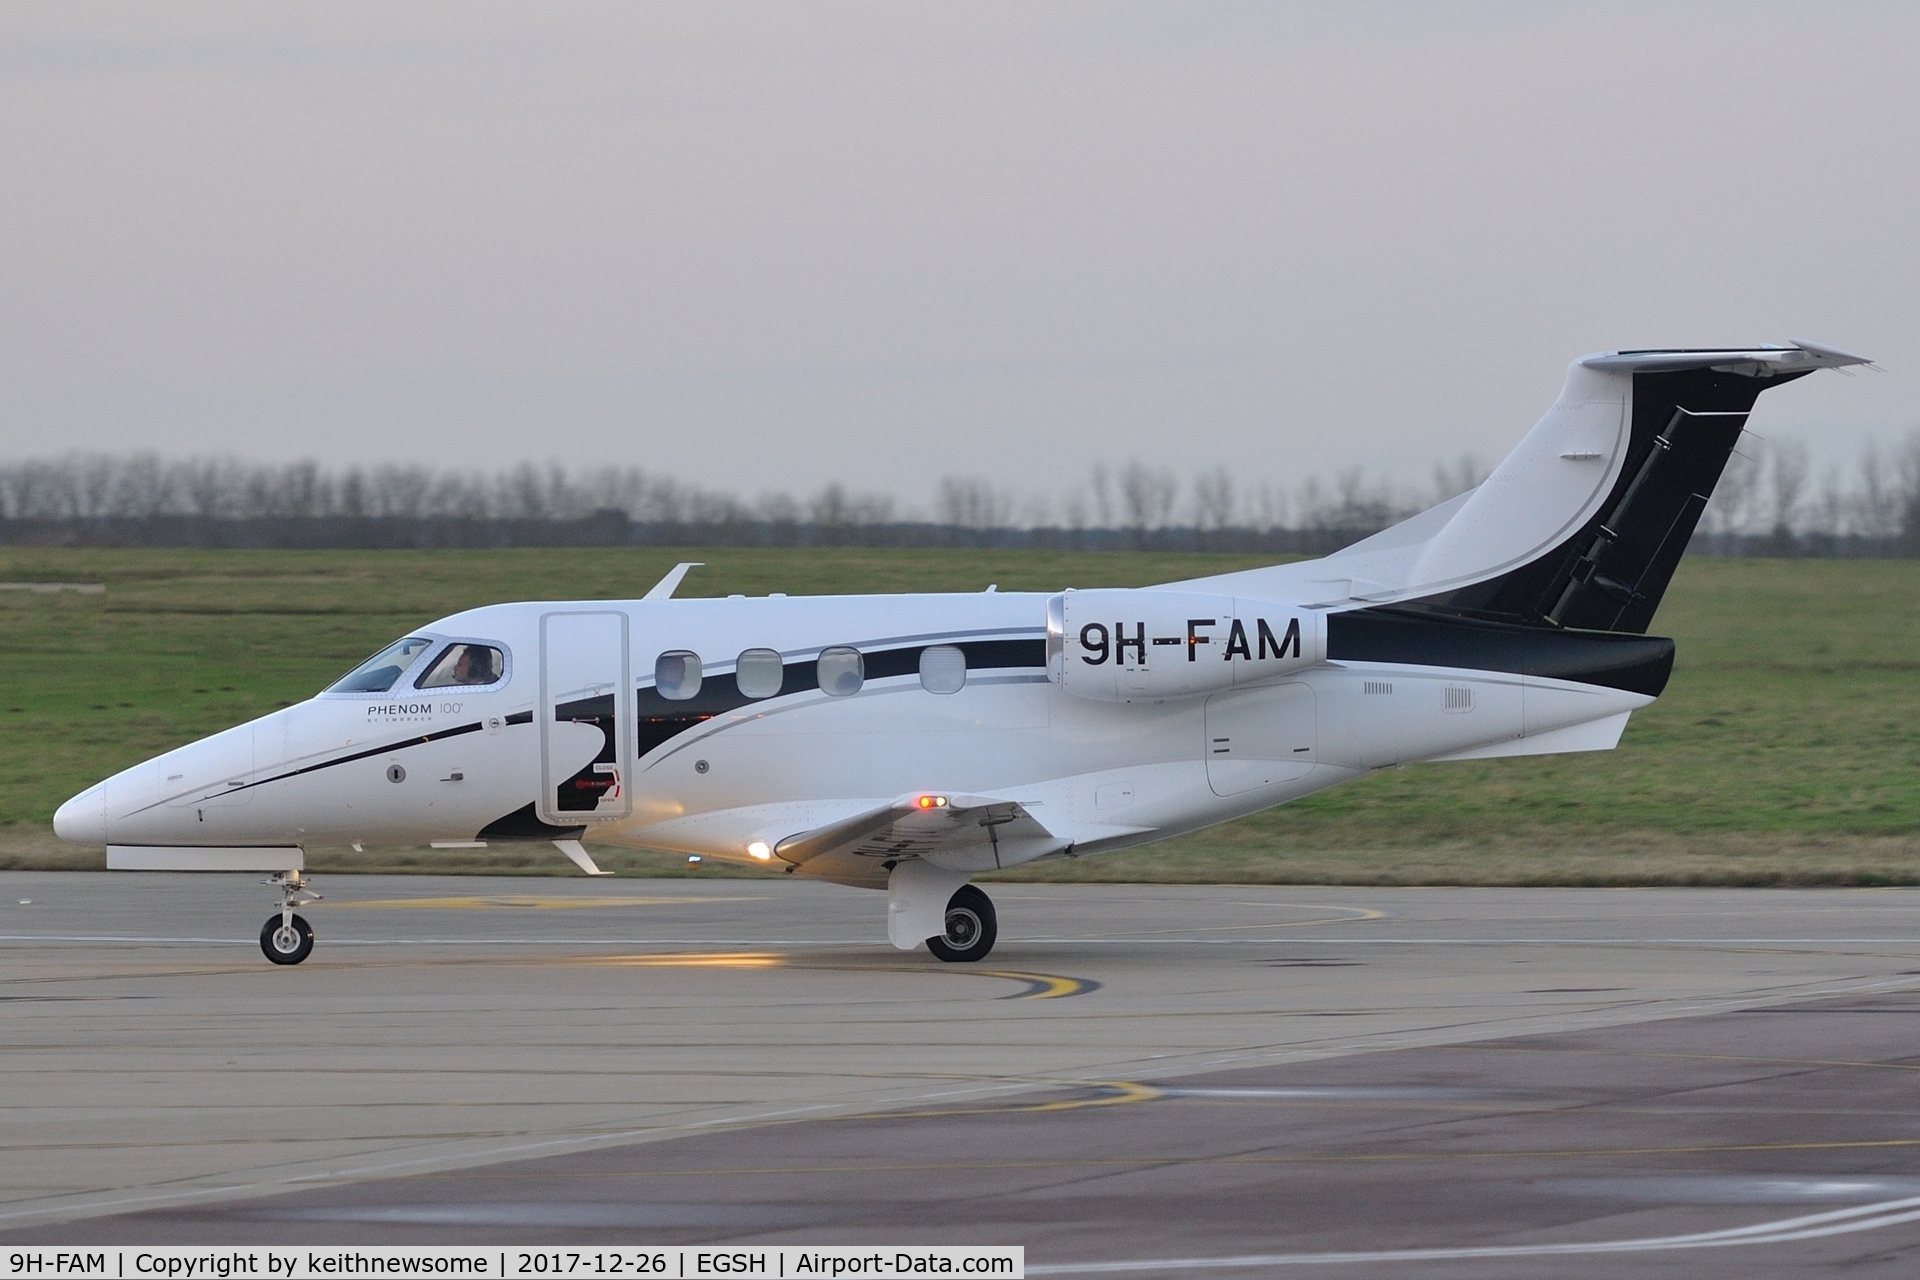 9H-FAM, 2009 Embraer EMB-500 Phenom 100 C/N 50000100, Arriving at Norwich from Glasgow.